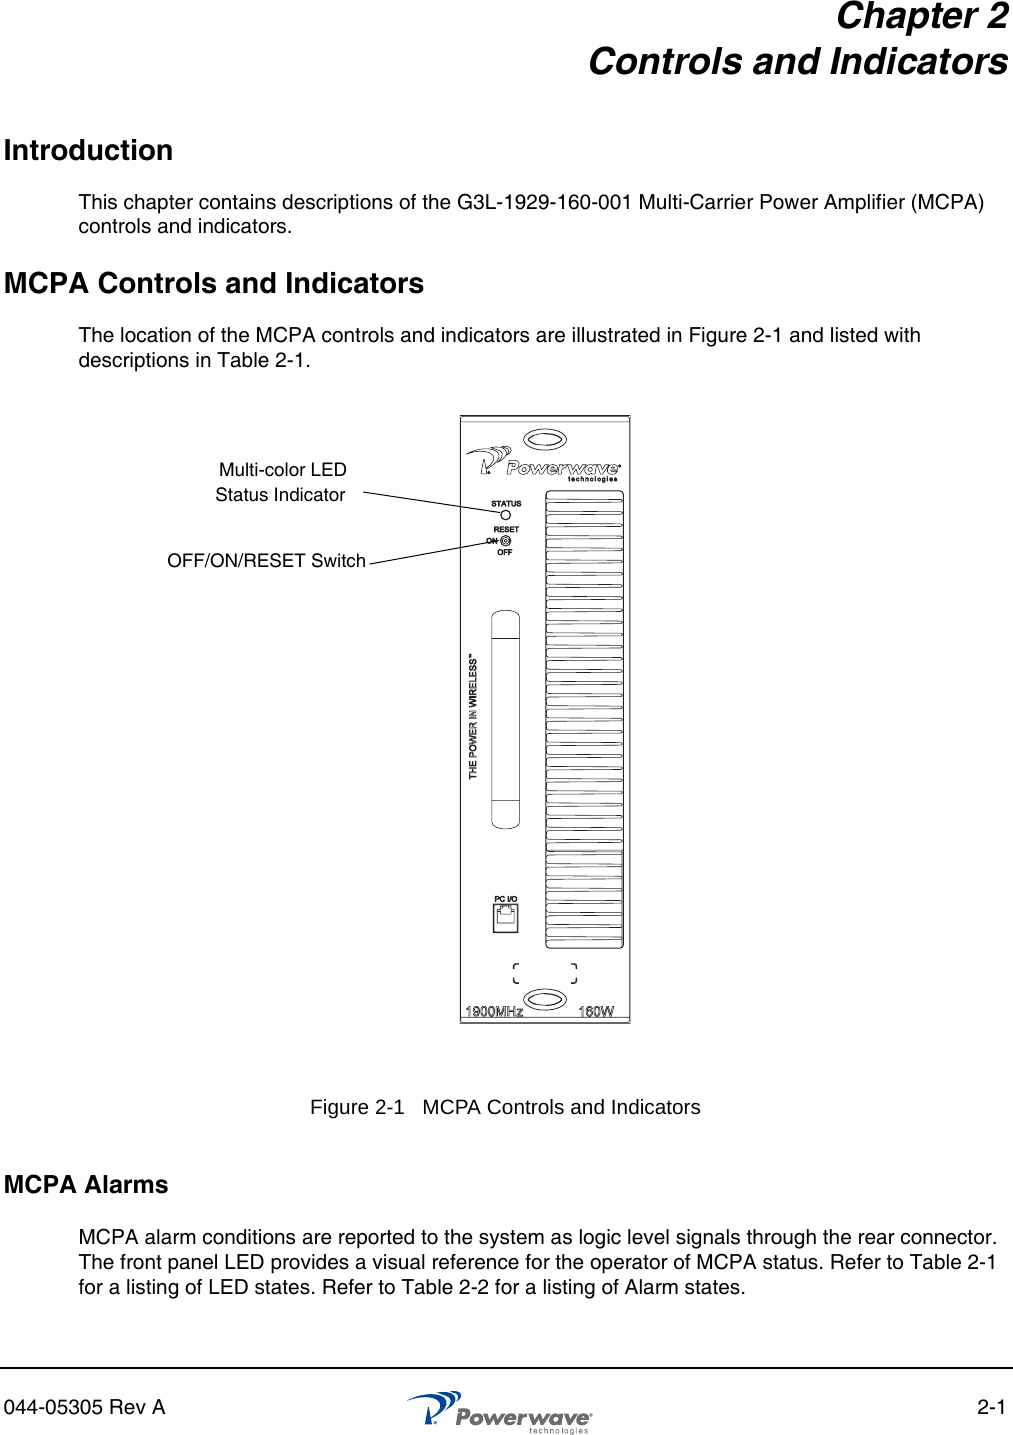 044-05305 Rev A 2-1Chapter 2Controls and IndicatorsIntroductionThis chapter contains descriptions of the G3L-1929-160-001 Multi-Carrier Power Amplifier (MCPA) controls and indicators.MCPA Controls and IndicatorsThe location of the MCPA controls and indicators are illustrated in Figure 2-1 and listed with descriptions in Table 2-1.MCPA AlarmsMCPA alarm conditions are reported to the system as logic level signals through the rear connector. The front panel LED provides a visual reference for the operator of MCPA status. Refer to Table 2-1 for a listing of LED states. Refer to Table 2-2 for a listing of Alarm states.Figure 2-1   MCPA Controls and Indicators Multi-color LEDOFF/ON/RESET SwitchStatus Indicator 